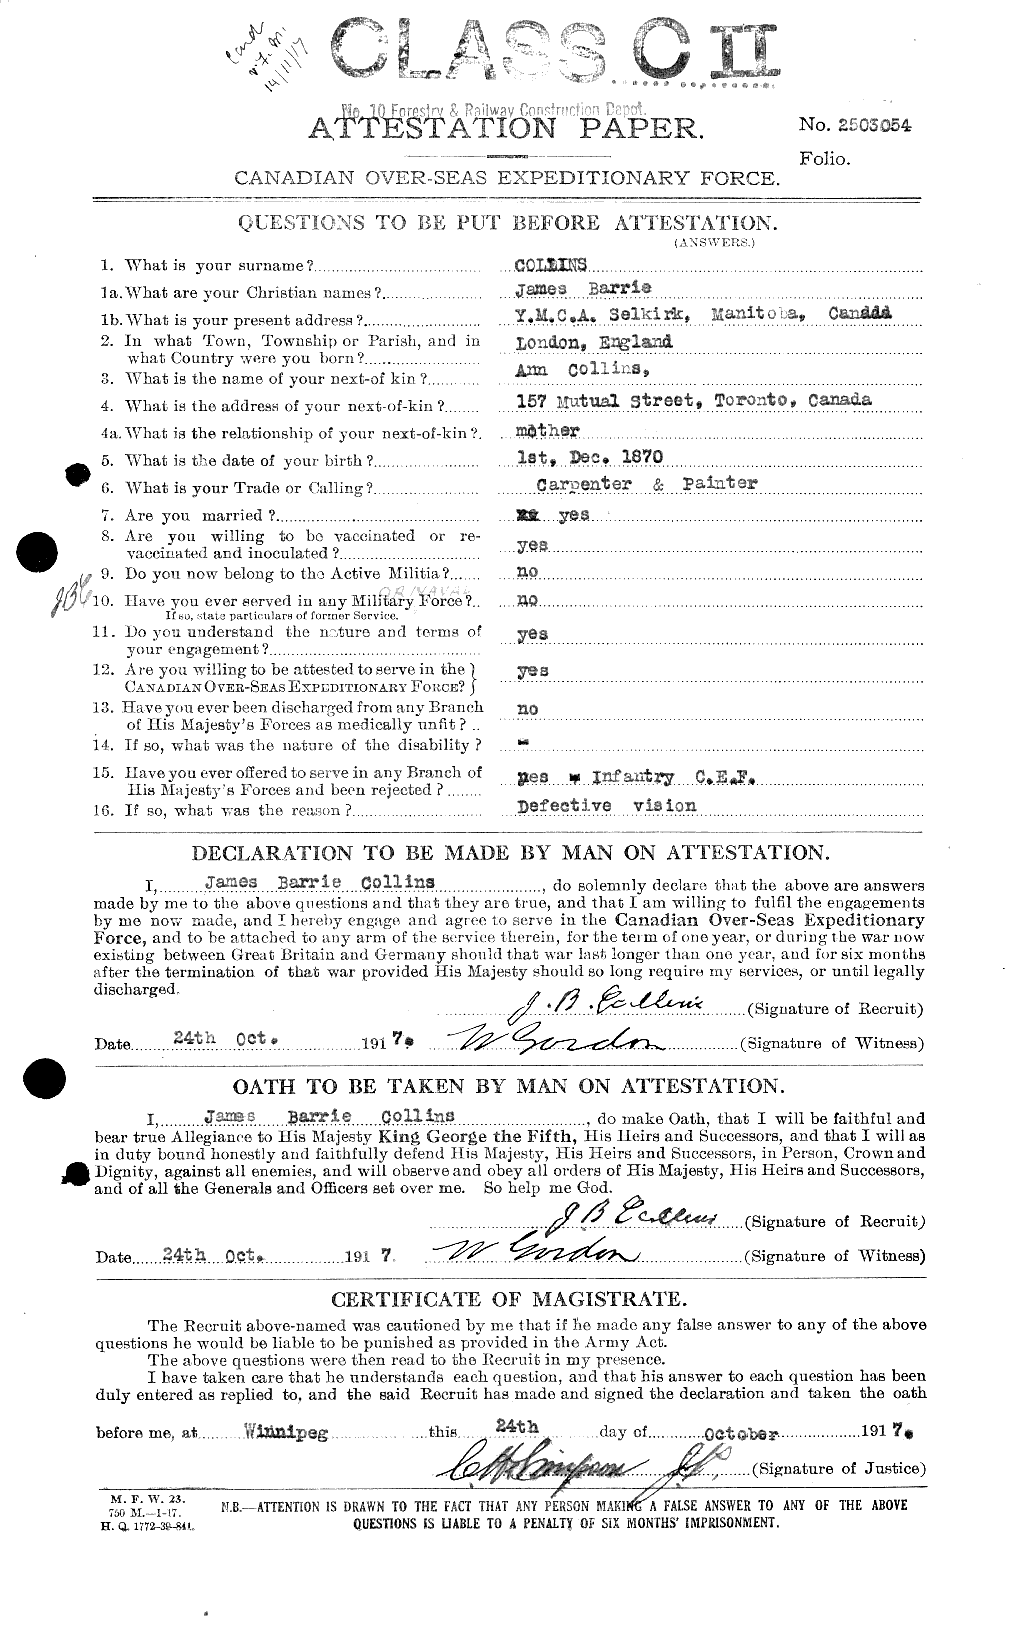 Personnel Records of the First World War - CEF 037927a